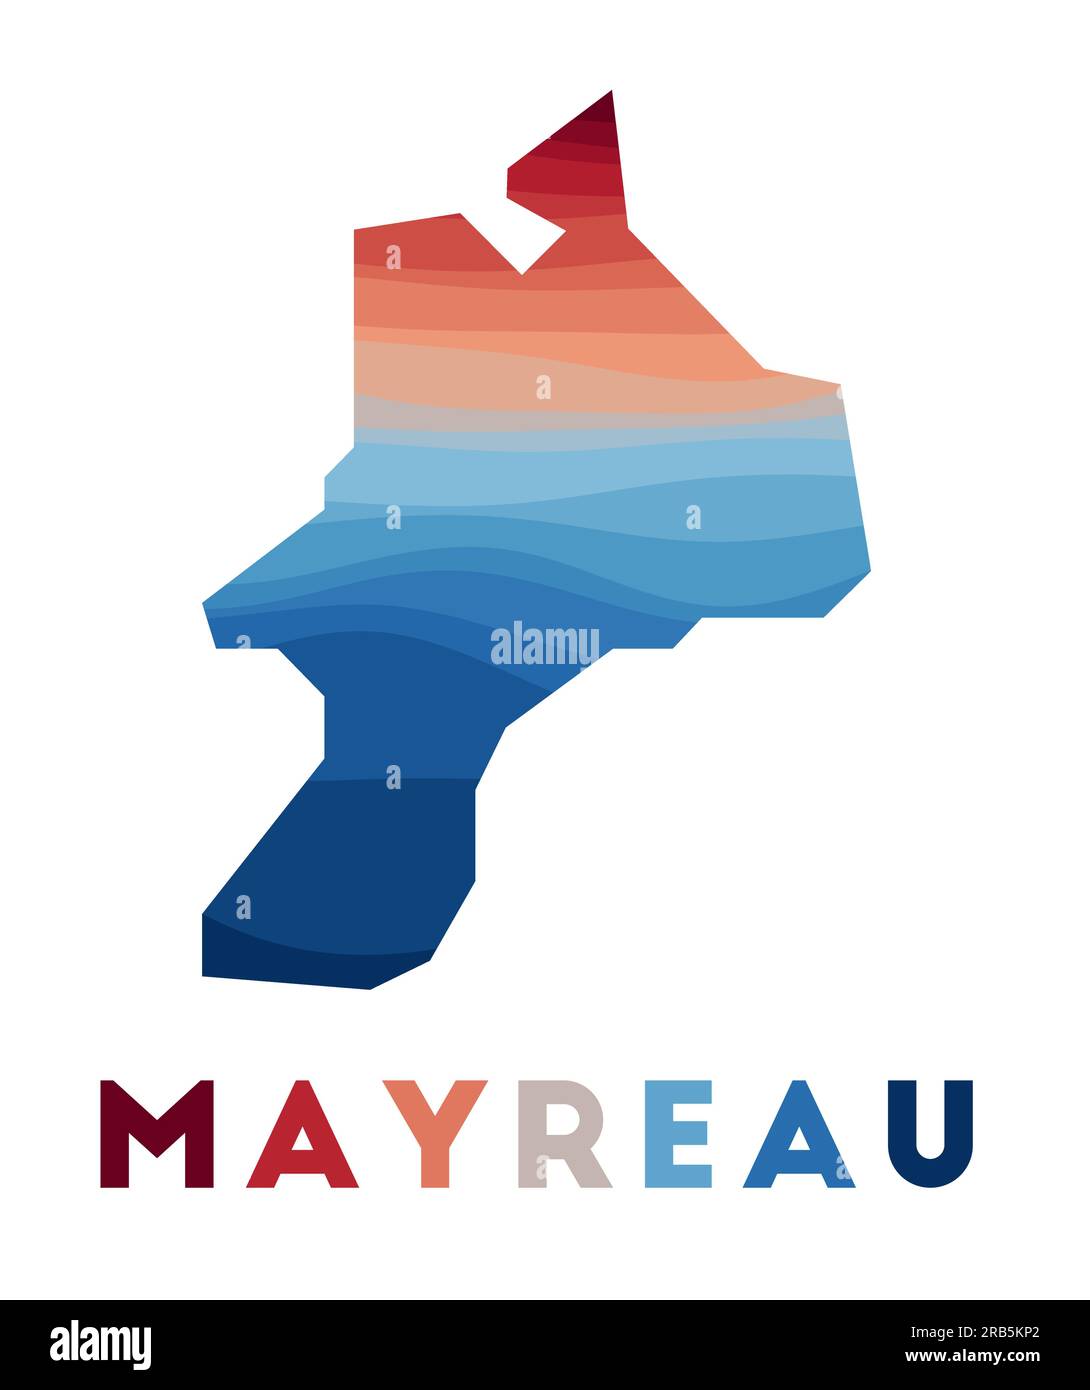 Mayreau map. Map of the island with beautiful geometric waves in red blue colors. Vivid Mayreau shape. Vector illustration. Stock Vector